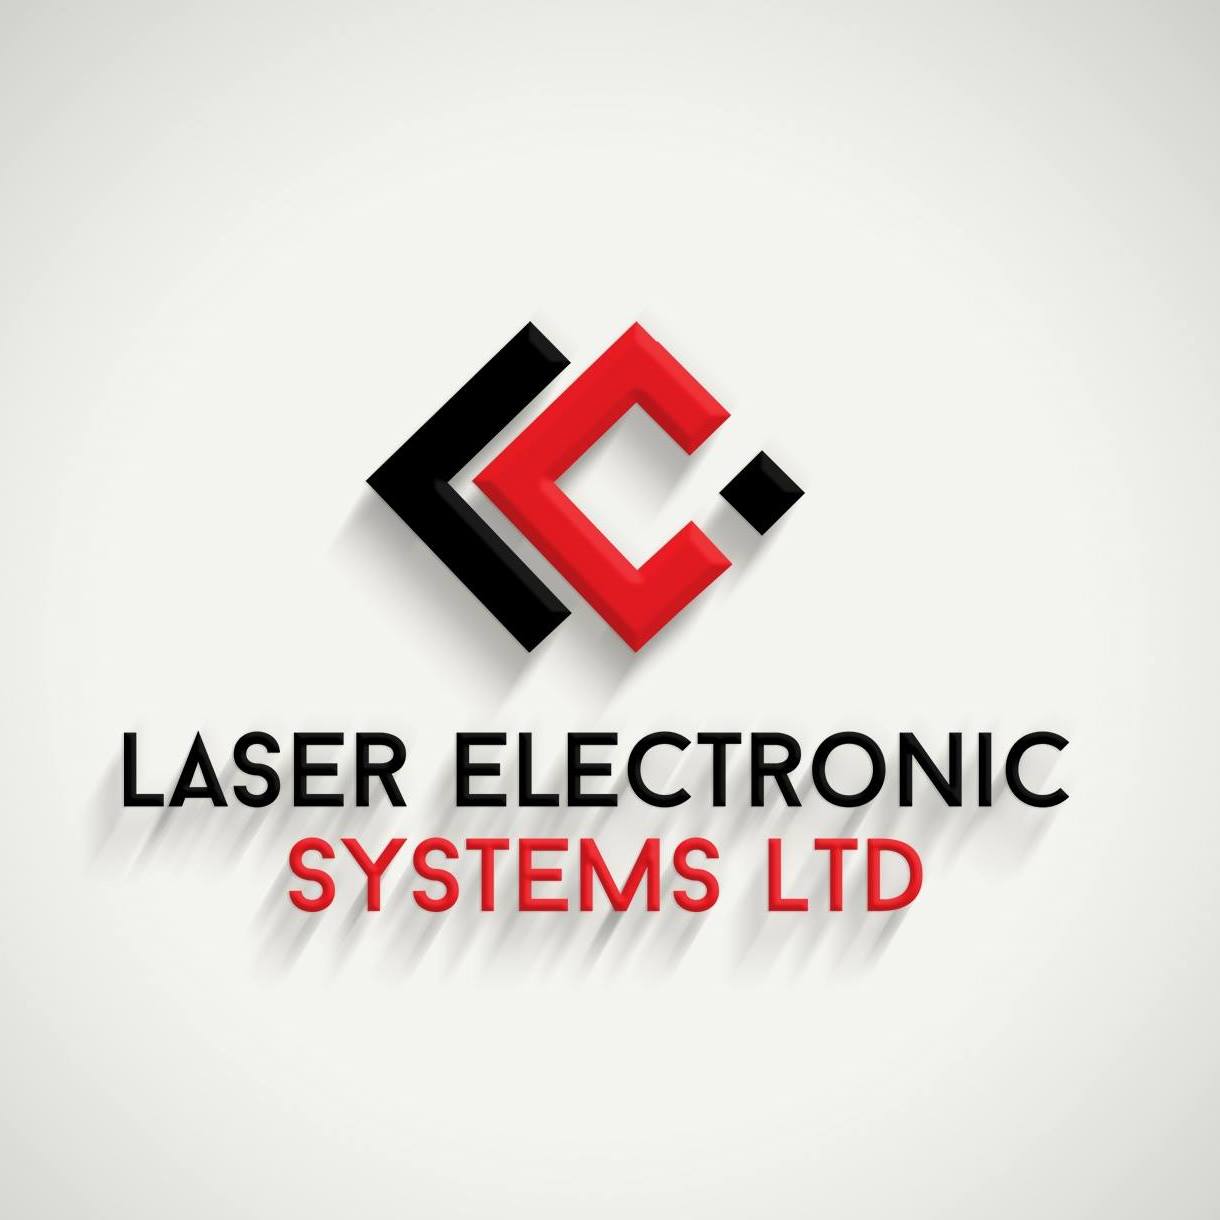 Laser Electronic Systems